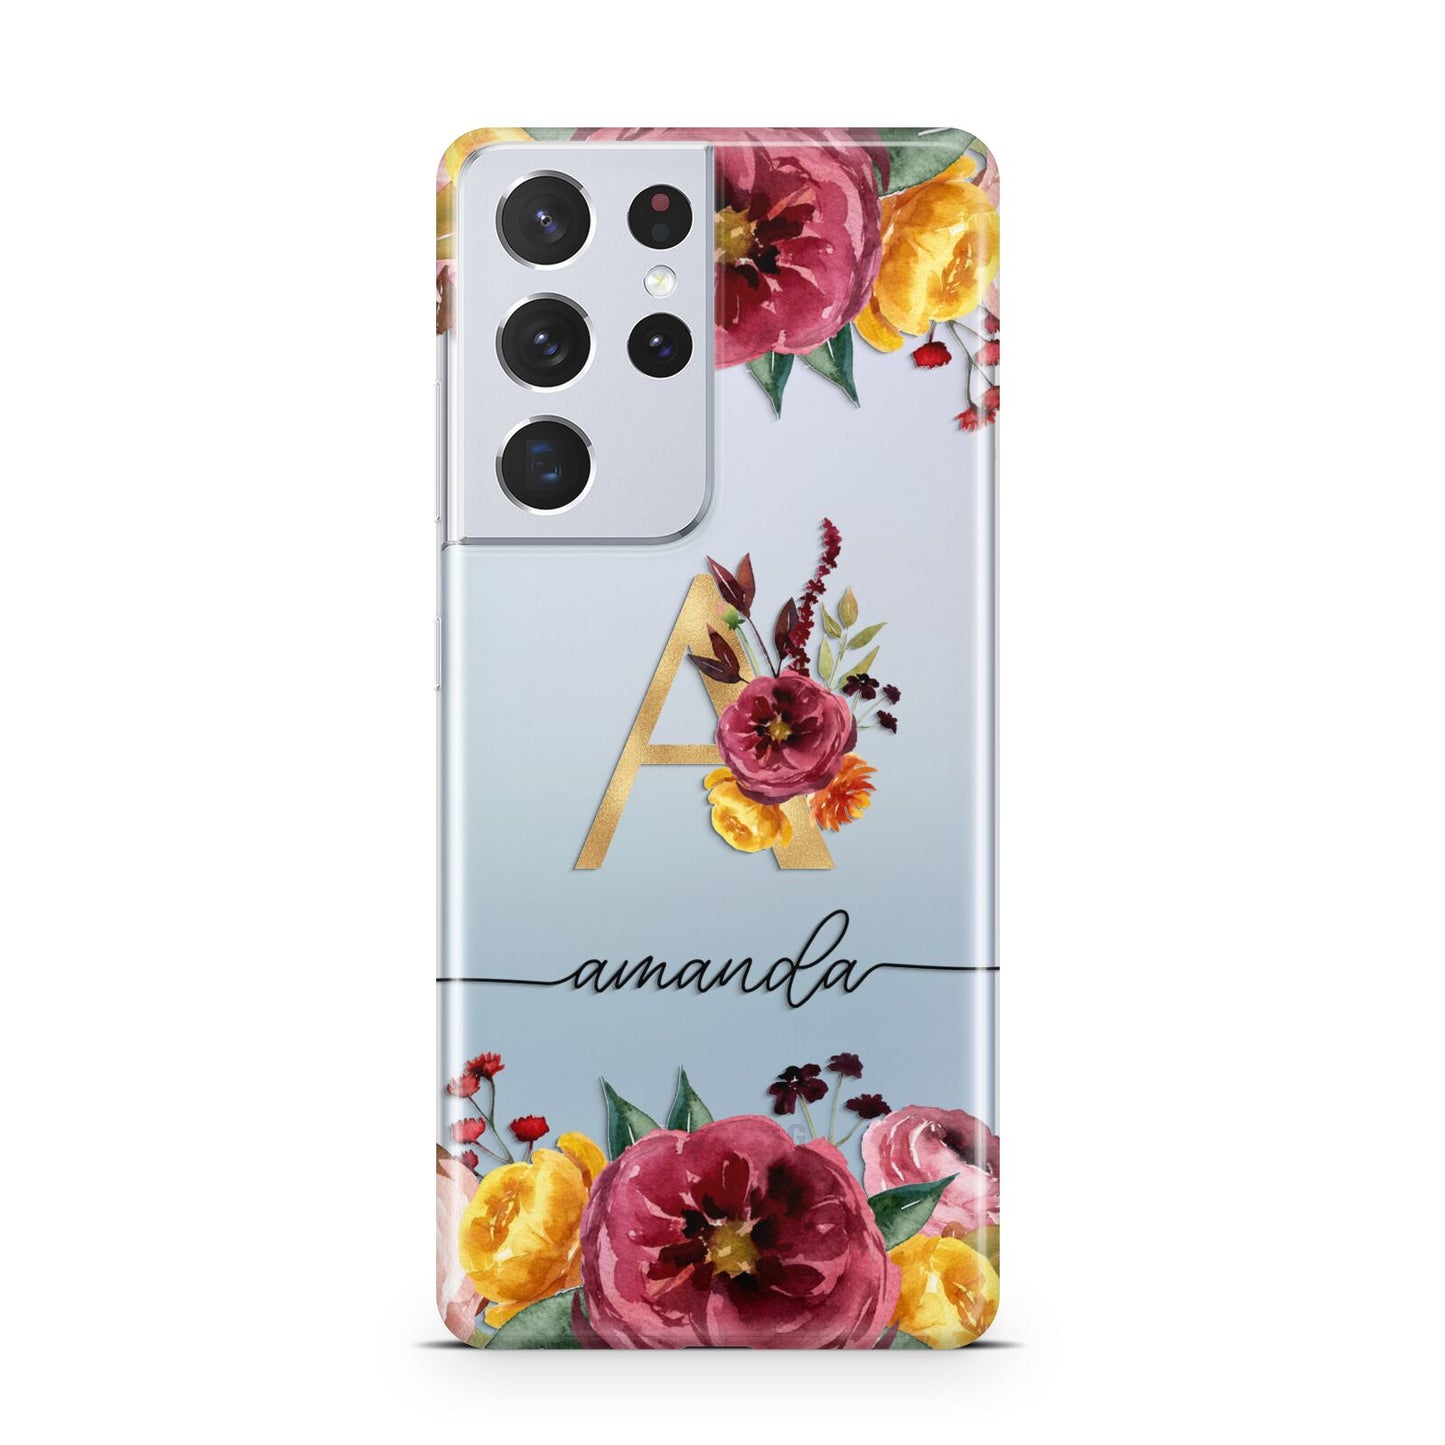 Autumn Watercolour Flowers with Initial Samsung S21 Ultra Case